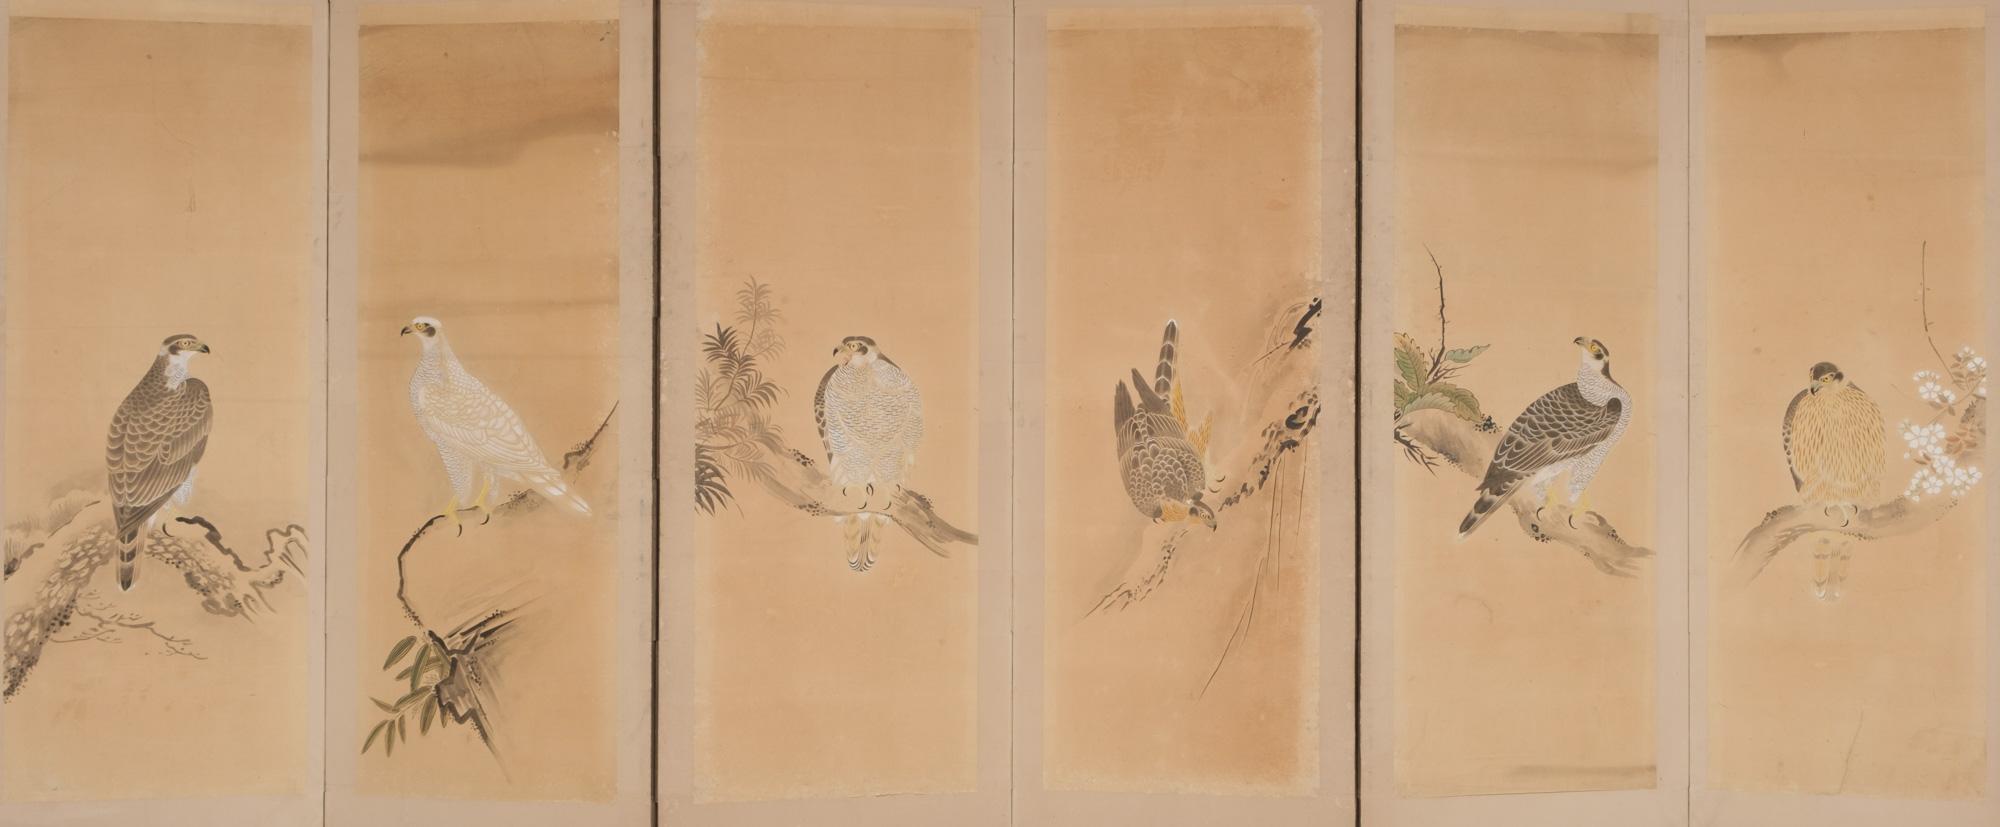 Wonderful large six-panel byôbu (folding screen) covered with six separate hanging scroll paintings (kakejiku) depicting different taka (hawks) perched on rocks and branches situated in different seasons.

Their fearsome beauty and predatory